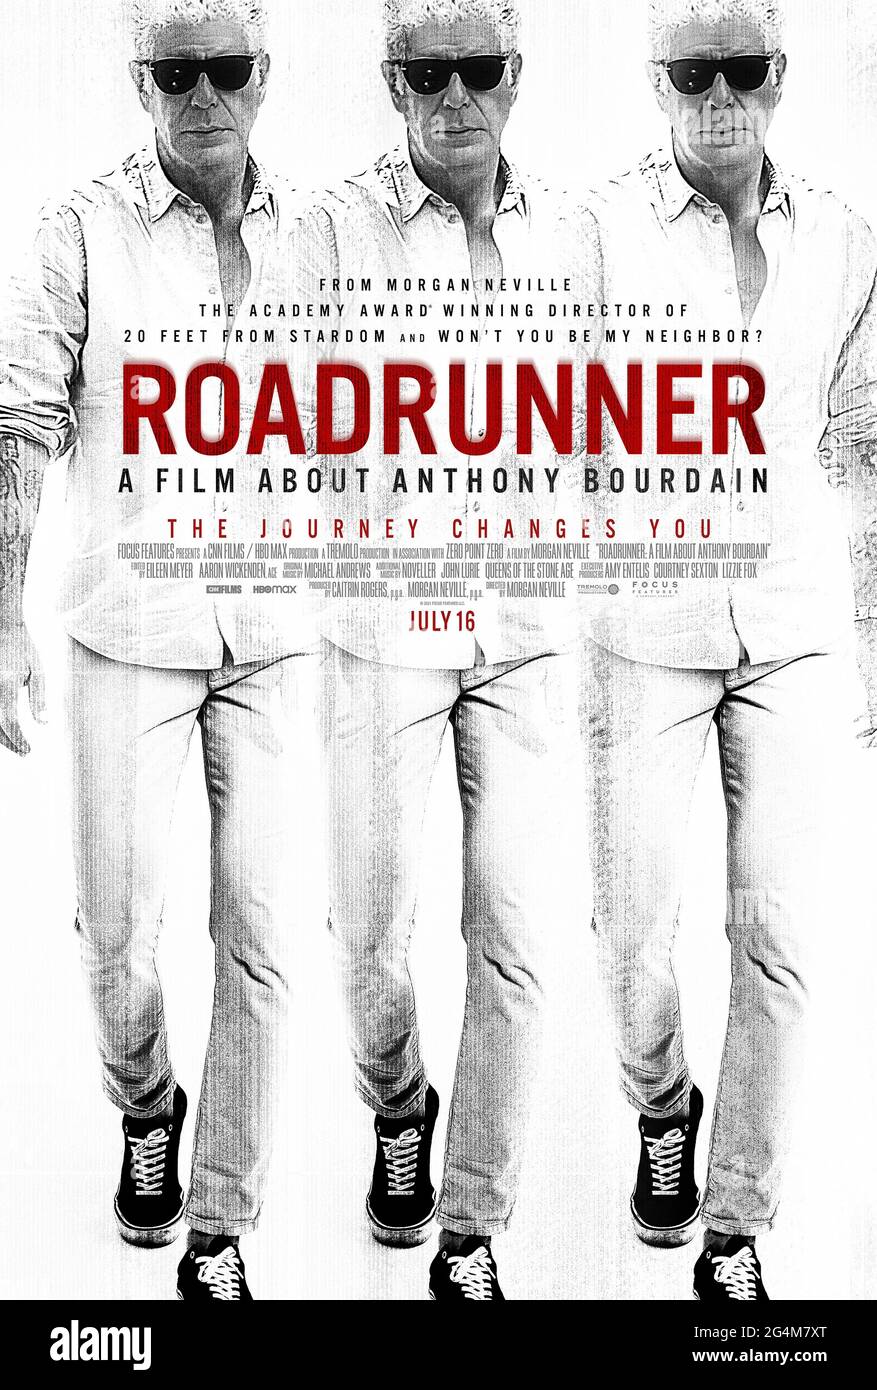 Roadrunner: A Film About Anthony Bourdain (2021) directed by Morgan Neville and starring Anthony Bourdain, Ottavia Bourdain and David Chang. A documentary about Anthony Bourdain and his career as a chef, writer and host, revered and renowned for his authentic approach to food, culture and travel. Stock Photo